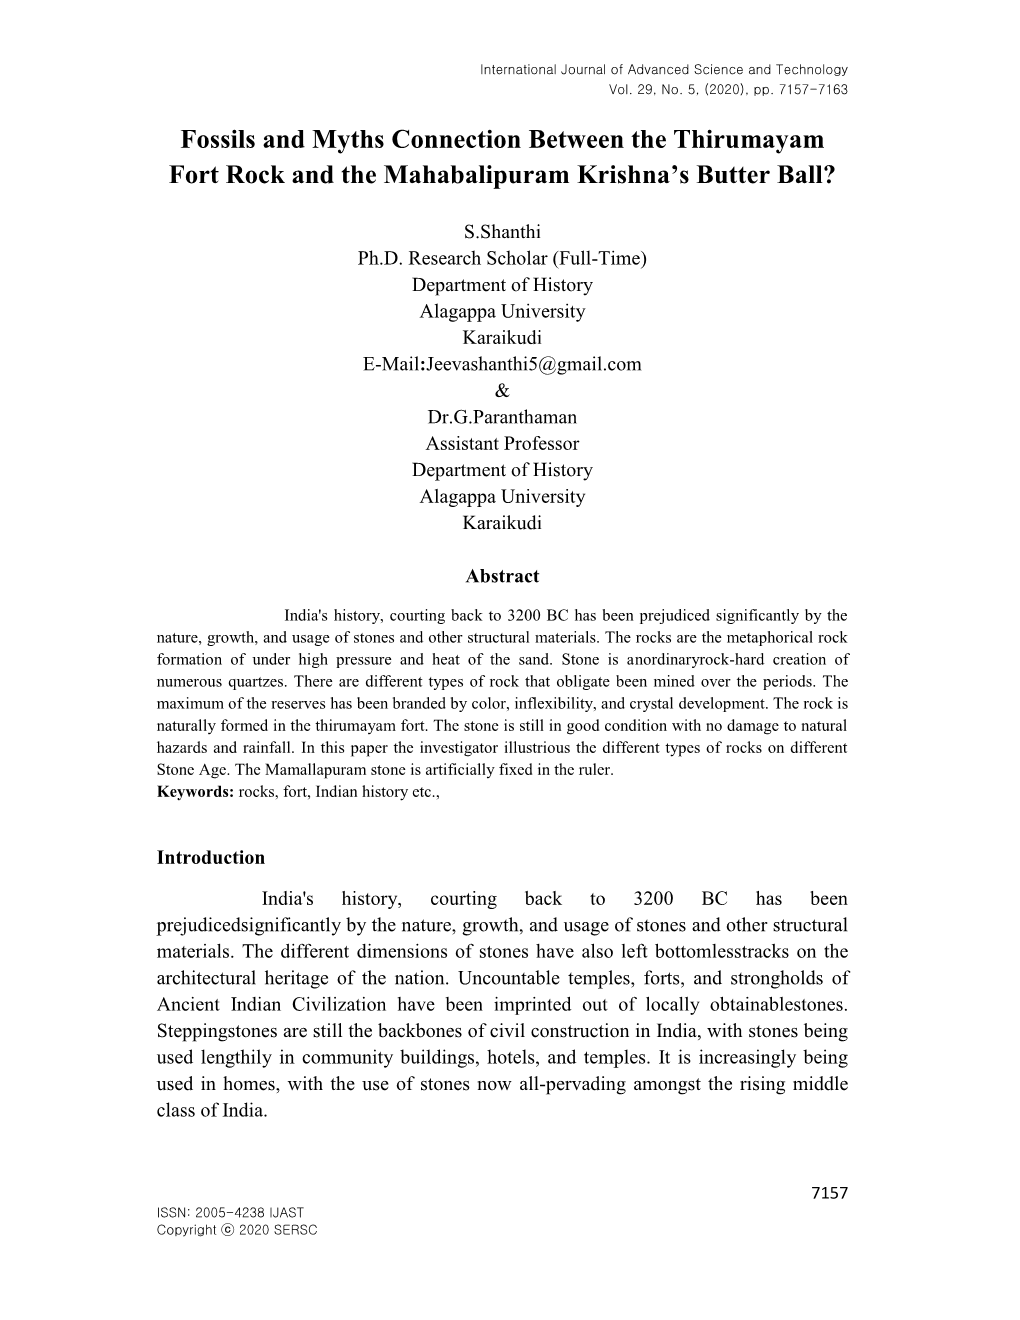 Fossils and Myths Connection Between the Thirumayam Fort Rock and the Mahabalipuram Krishna’S Butter Ball?